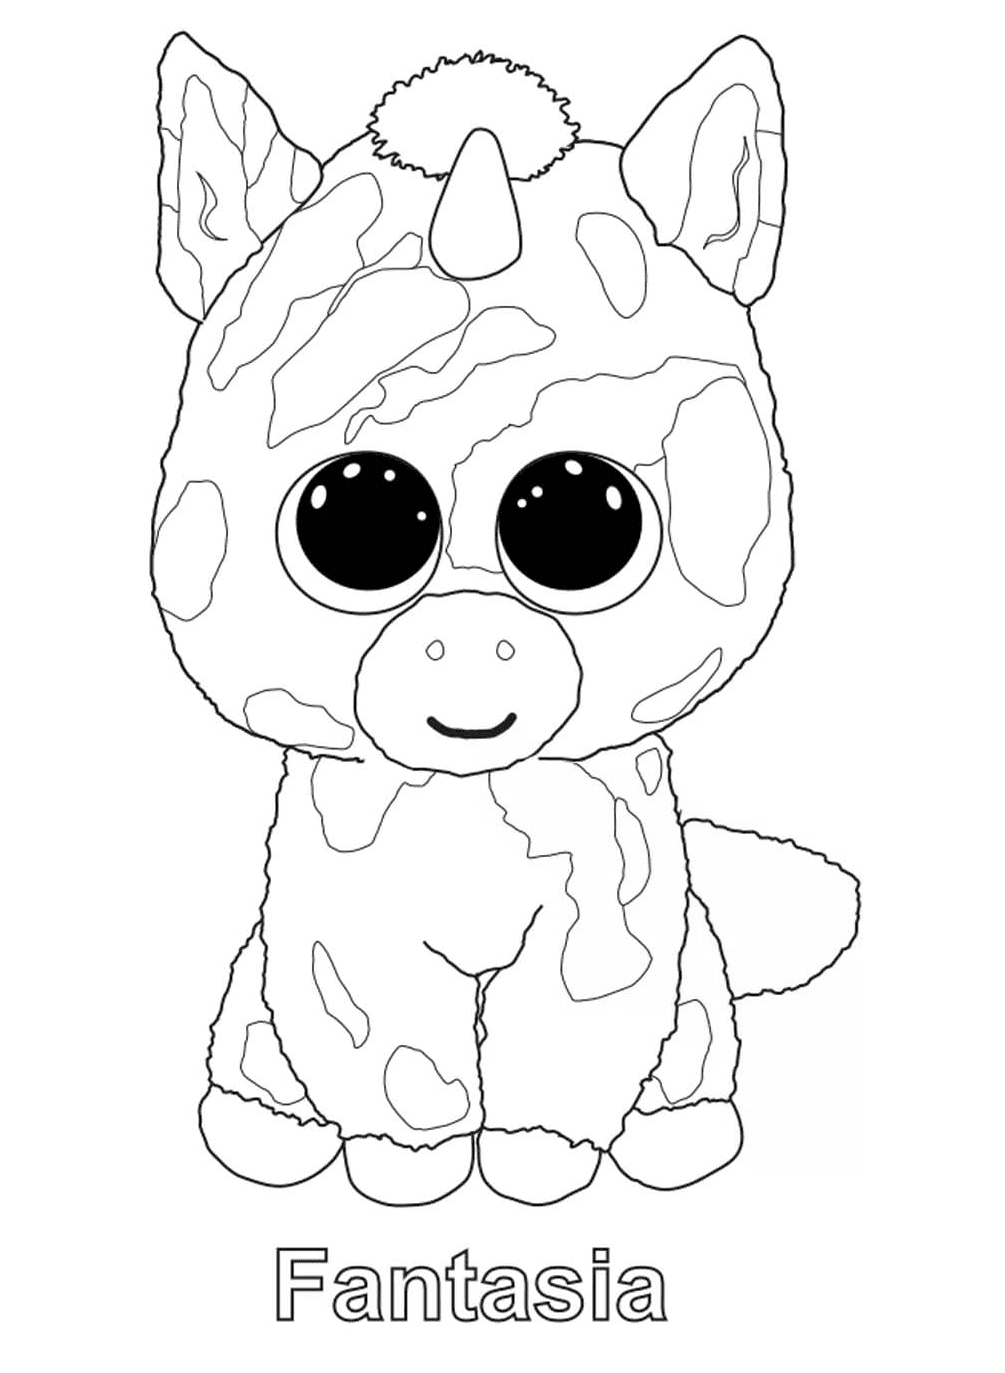 Fantasia Beanie Boos Coloring Pages   Beanie Boos Coloring Pages ...